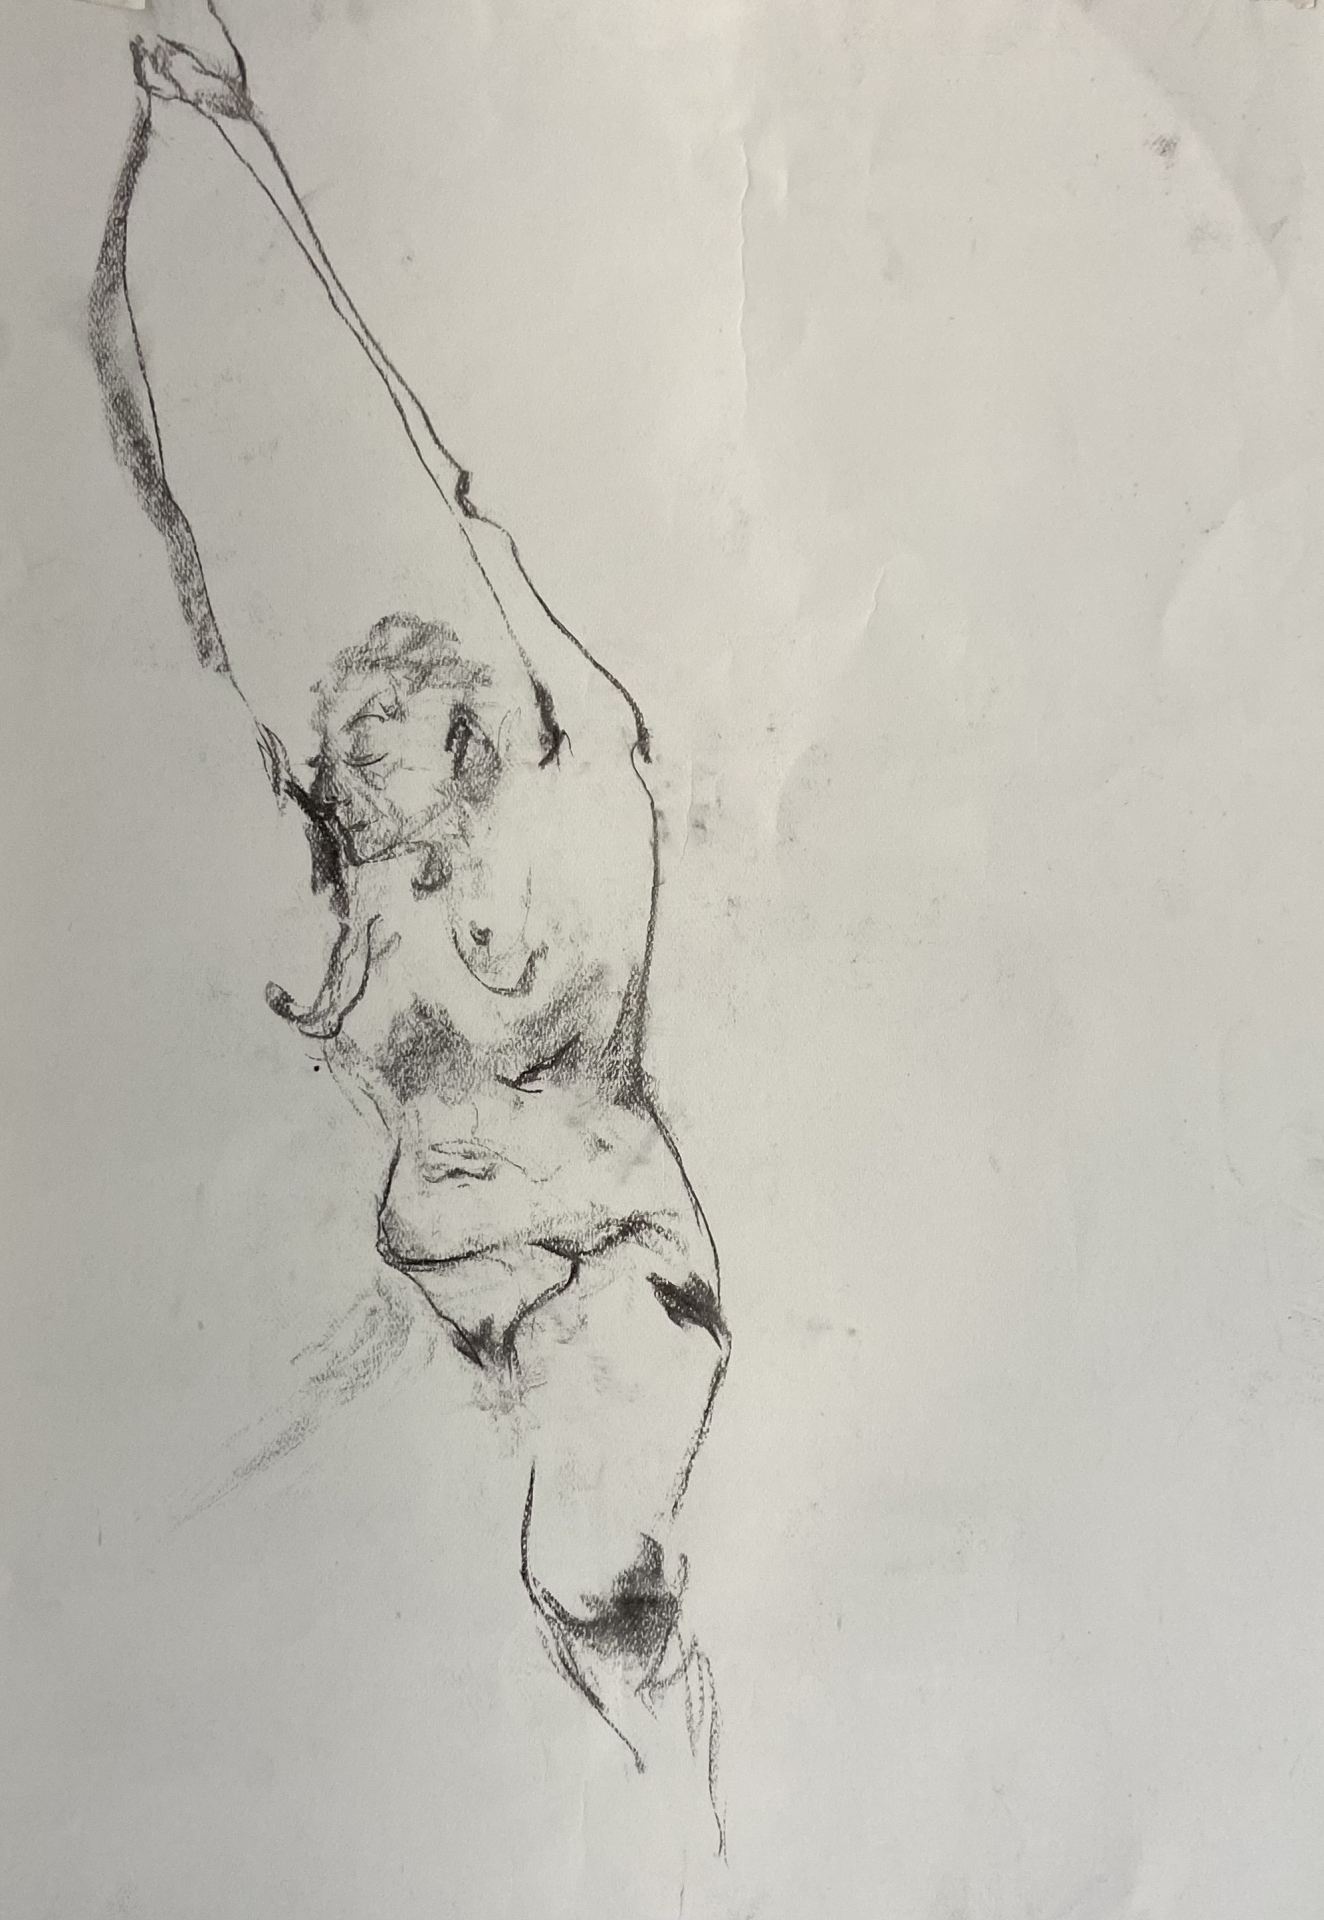 An abstract charcoal drawing of a person on white paper.